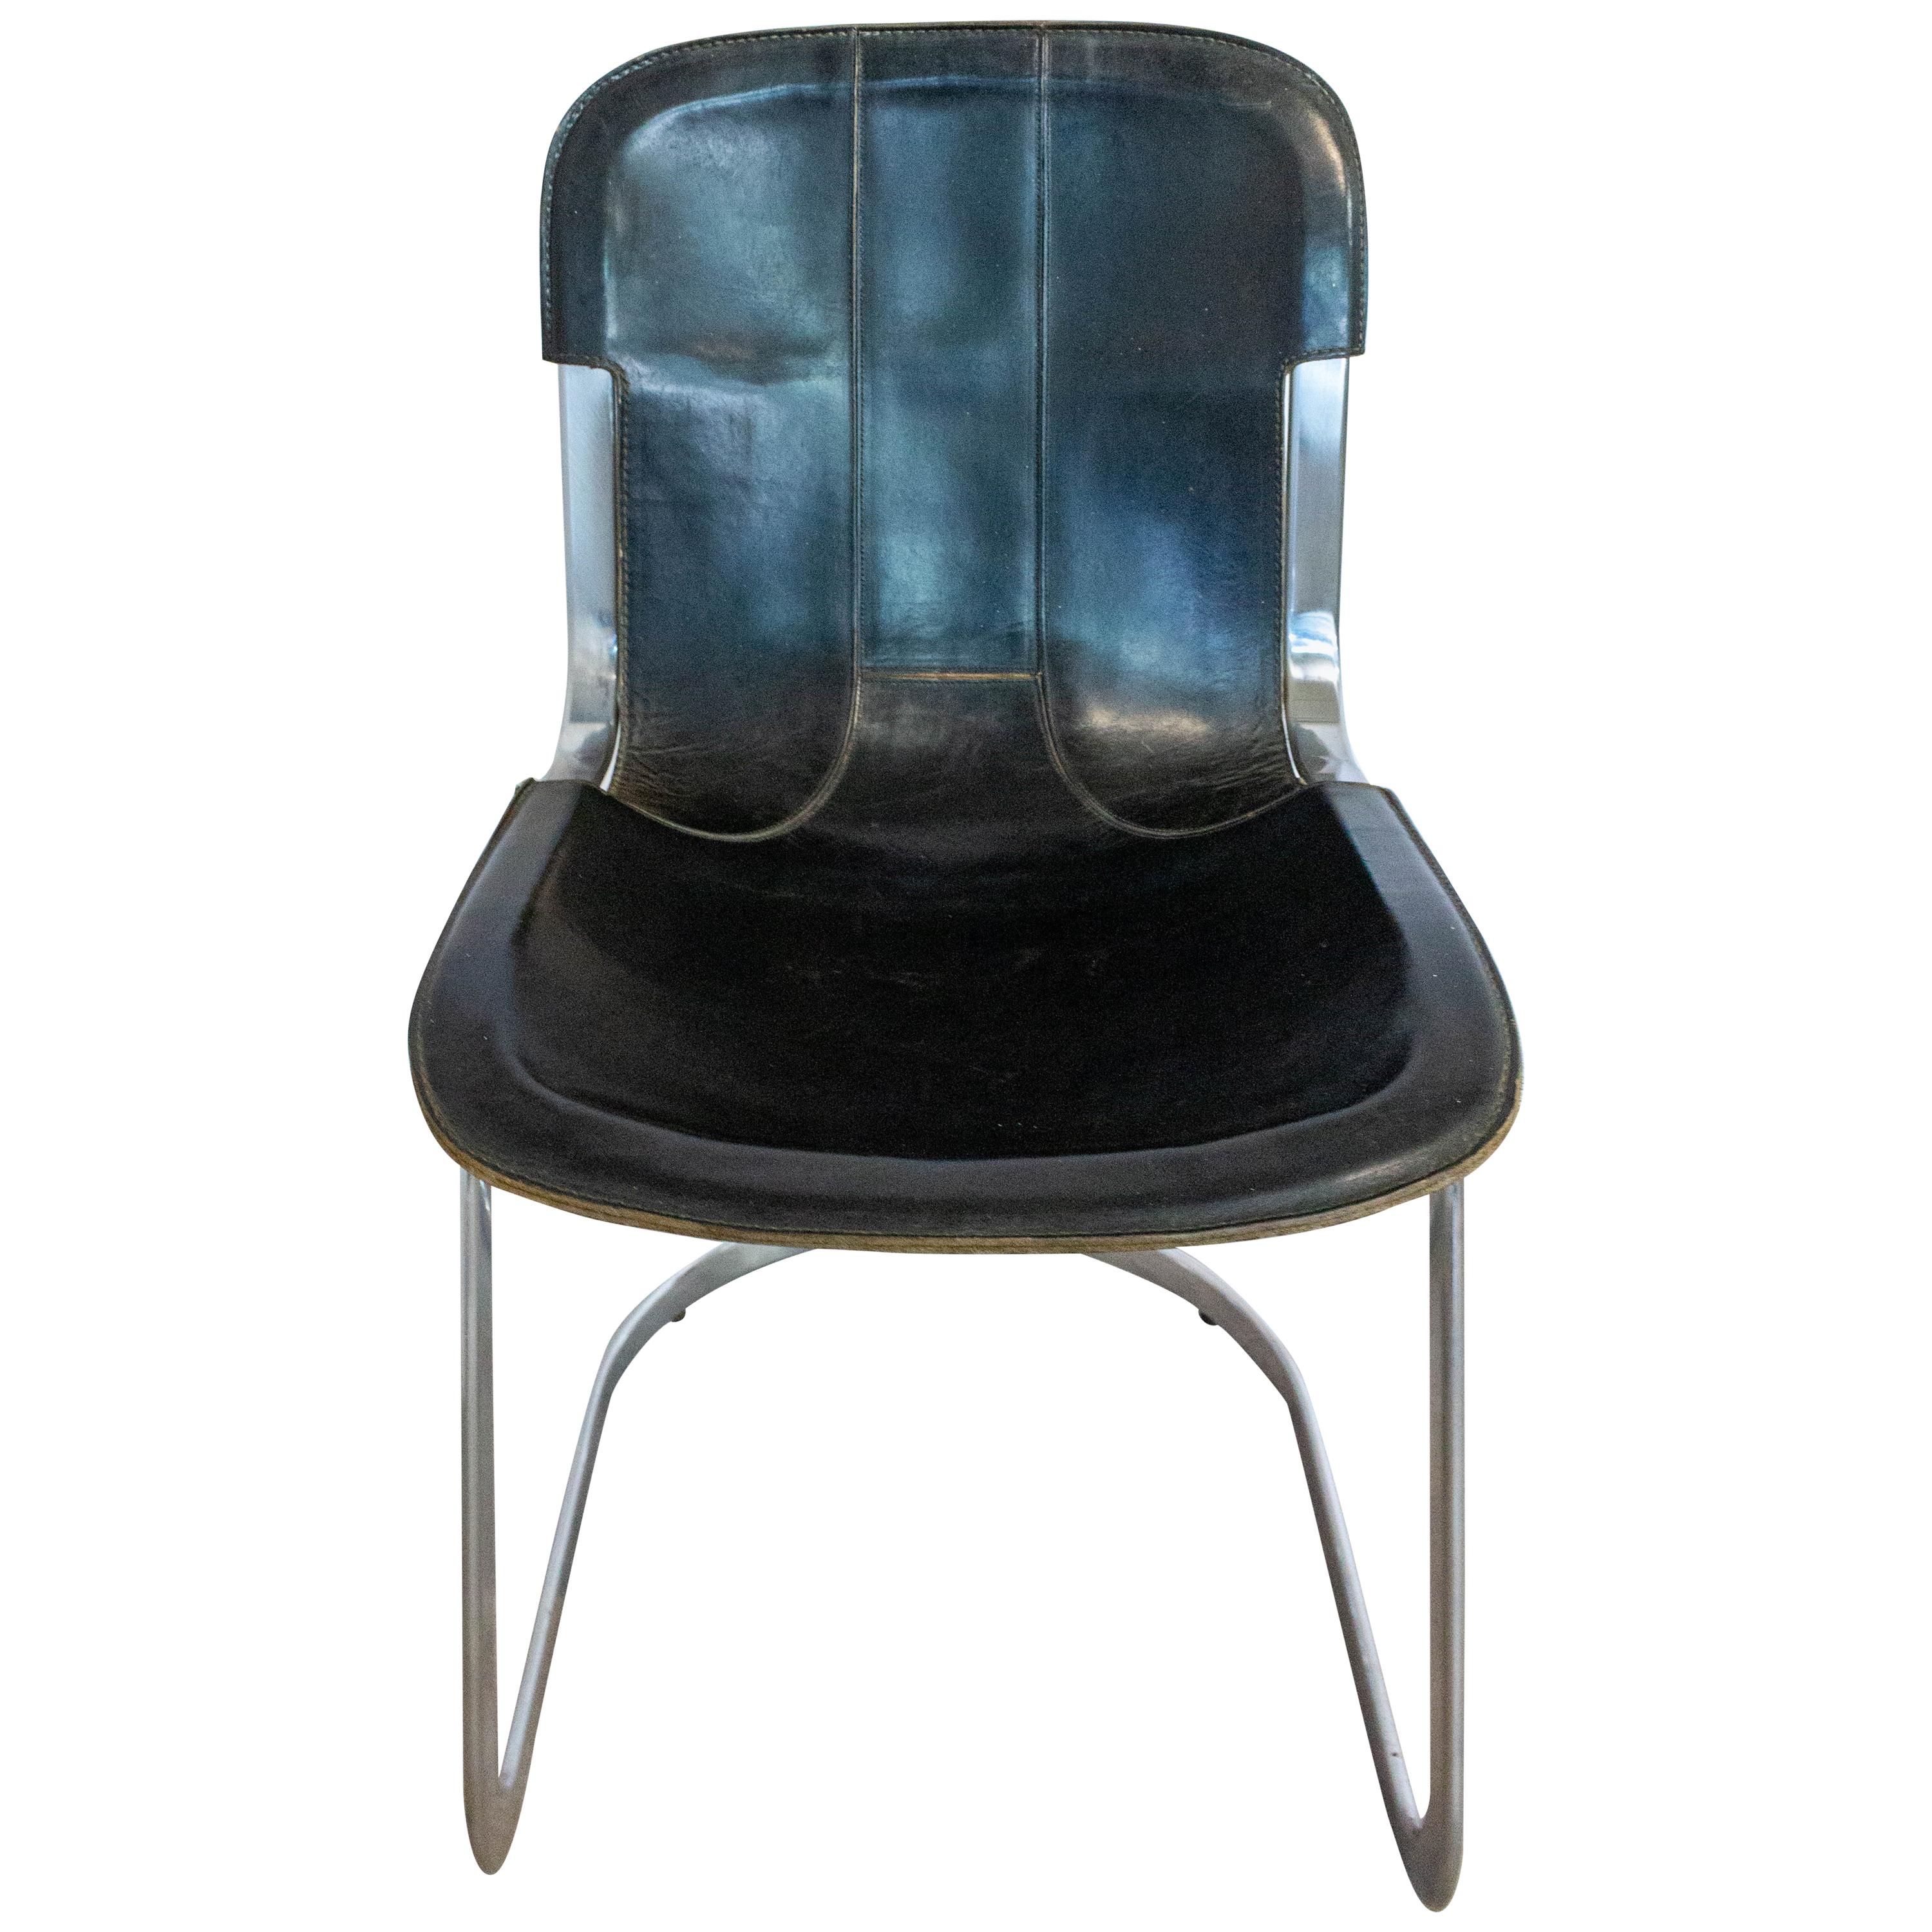 Chair Willy Rizzo Black Leather Chrome N1, circa 1970